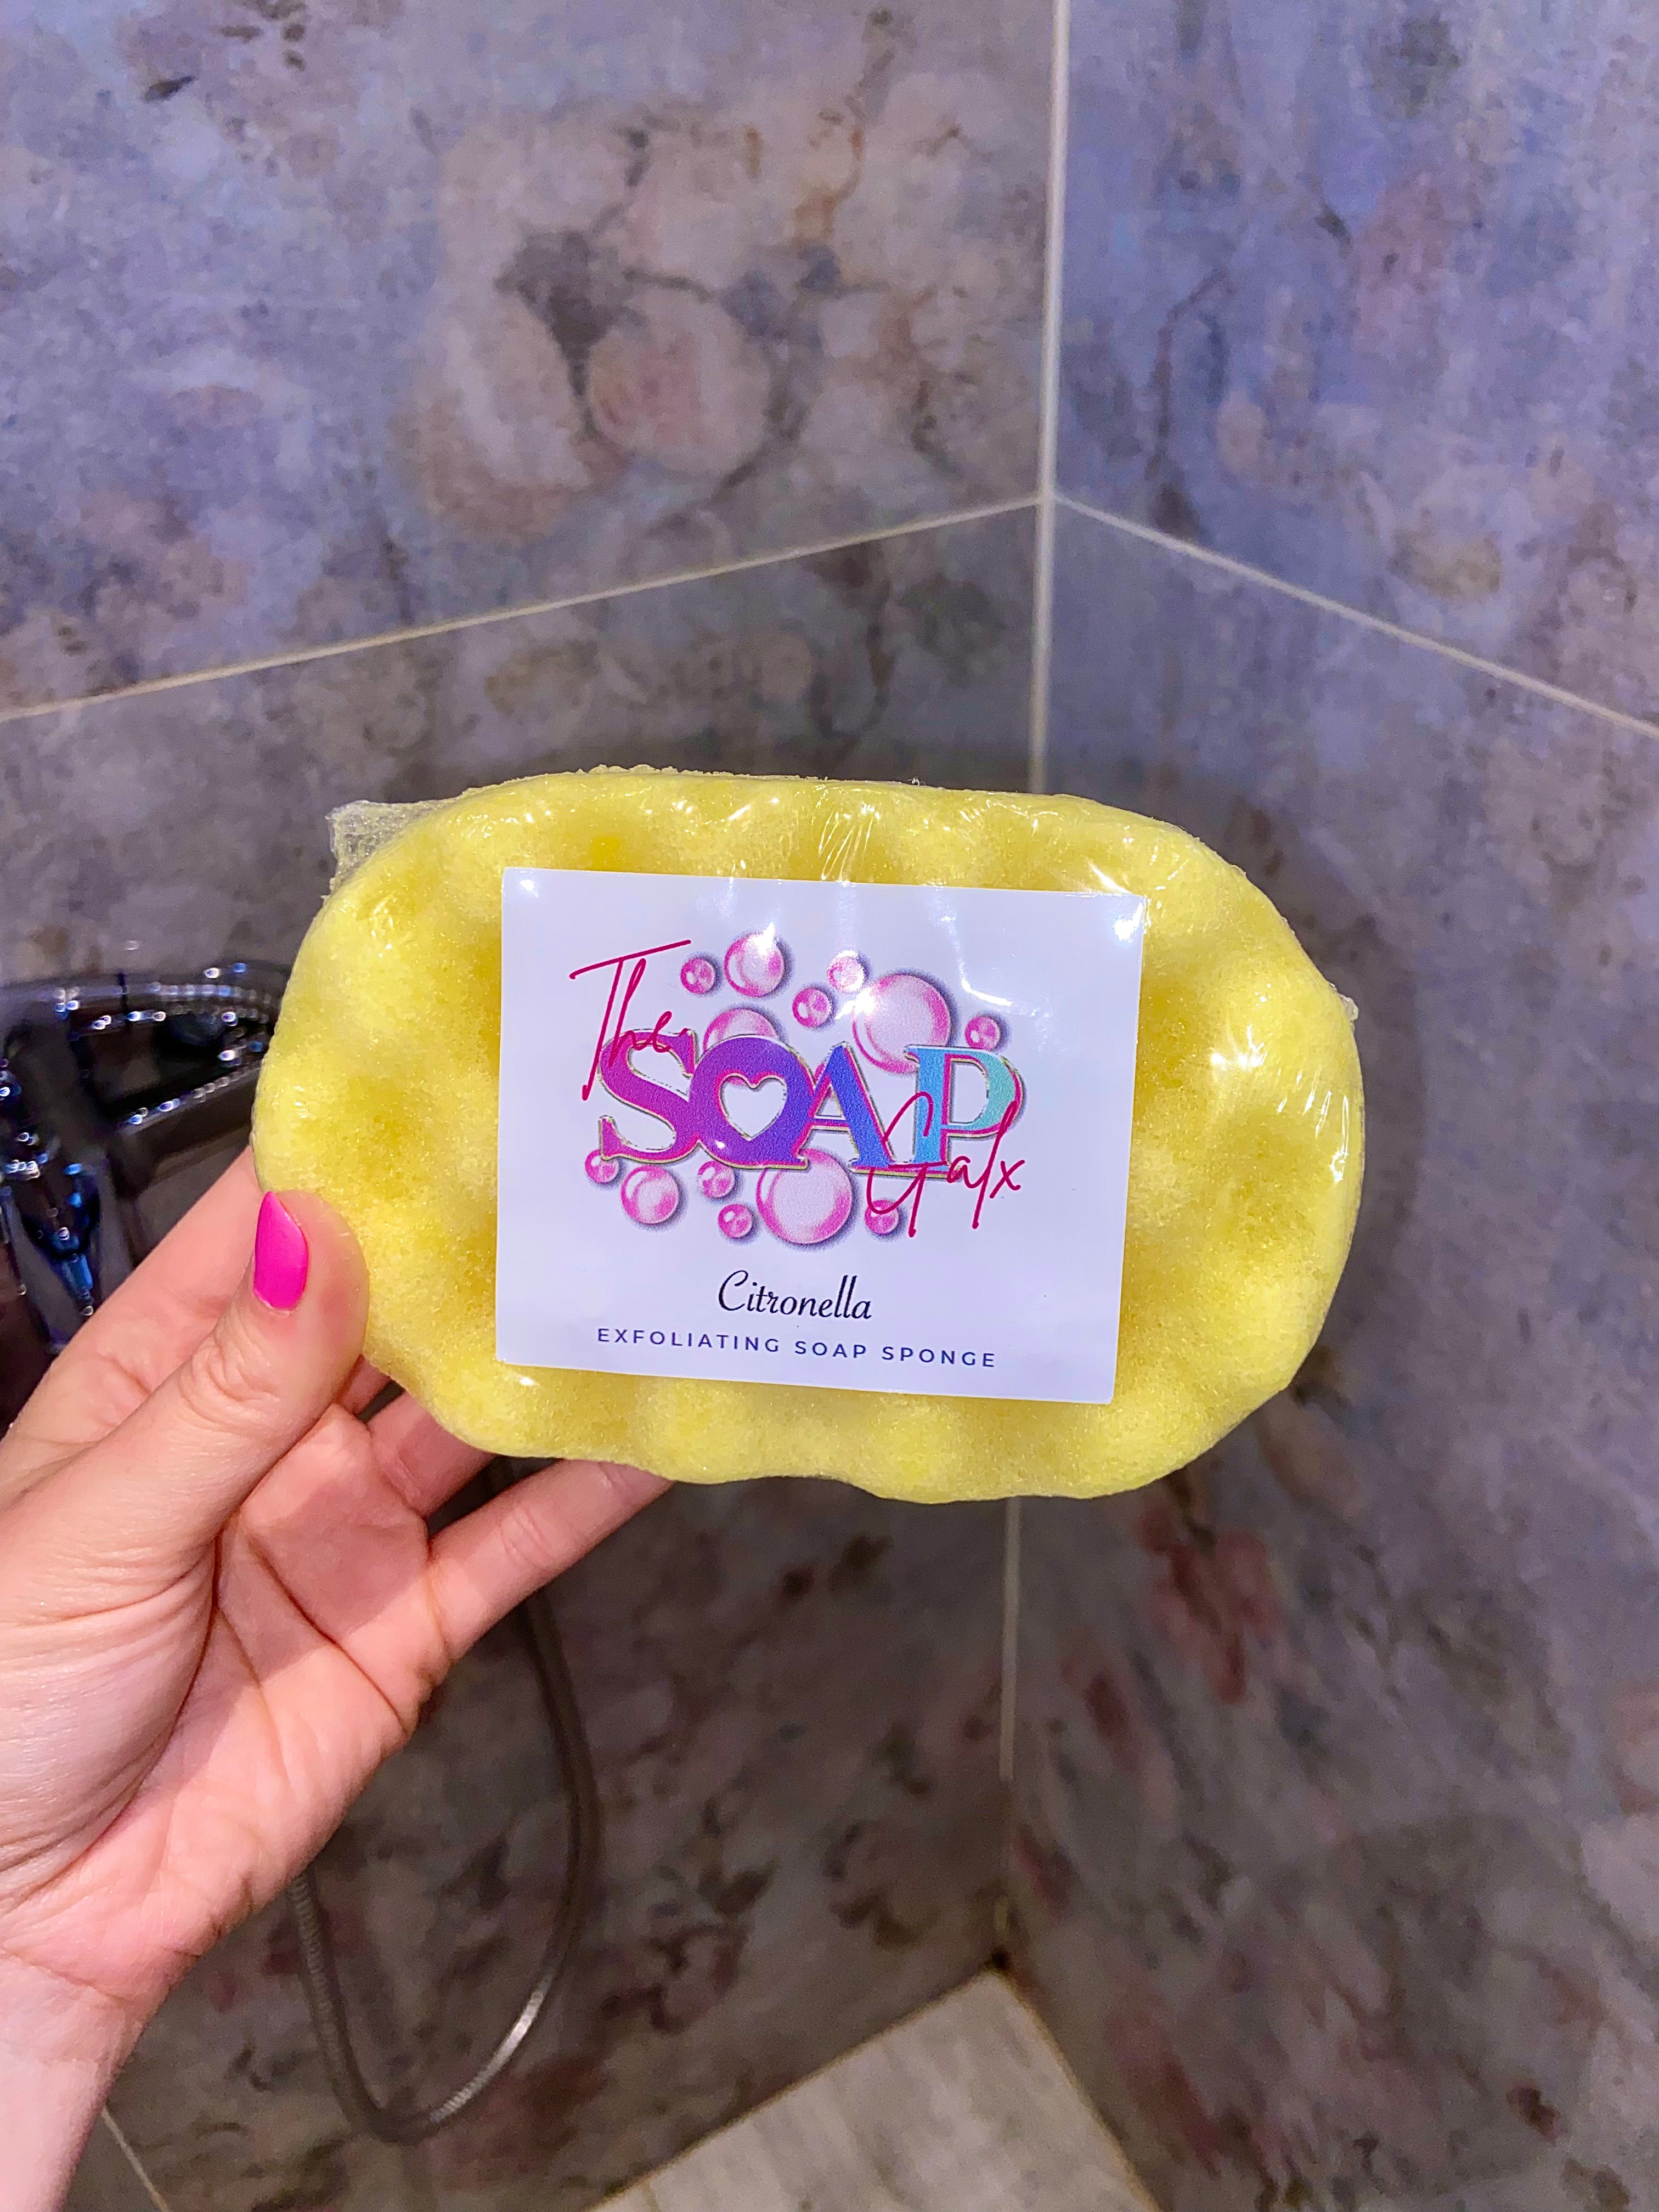 A hand holding a yellow Citronella Soap Sponge by The Soap Gals labeled "tsóraíocht soap co. citronella" against a tiled shower background, offering natural protection.